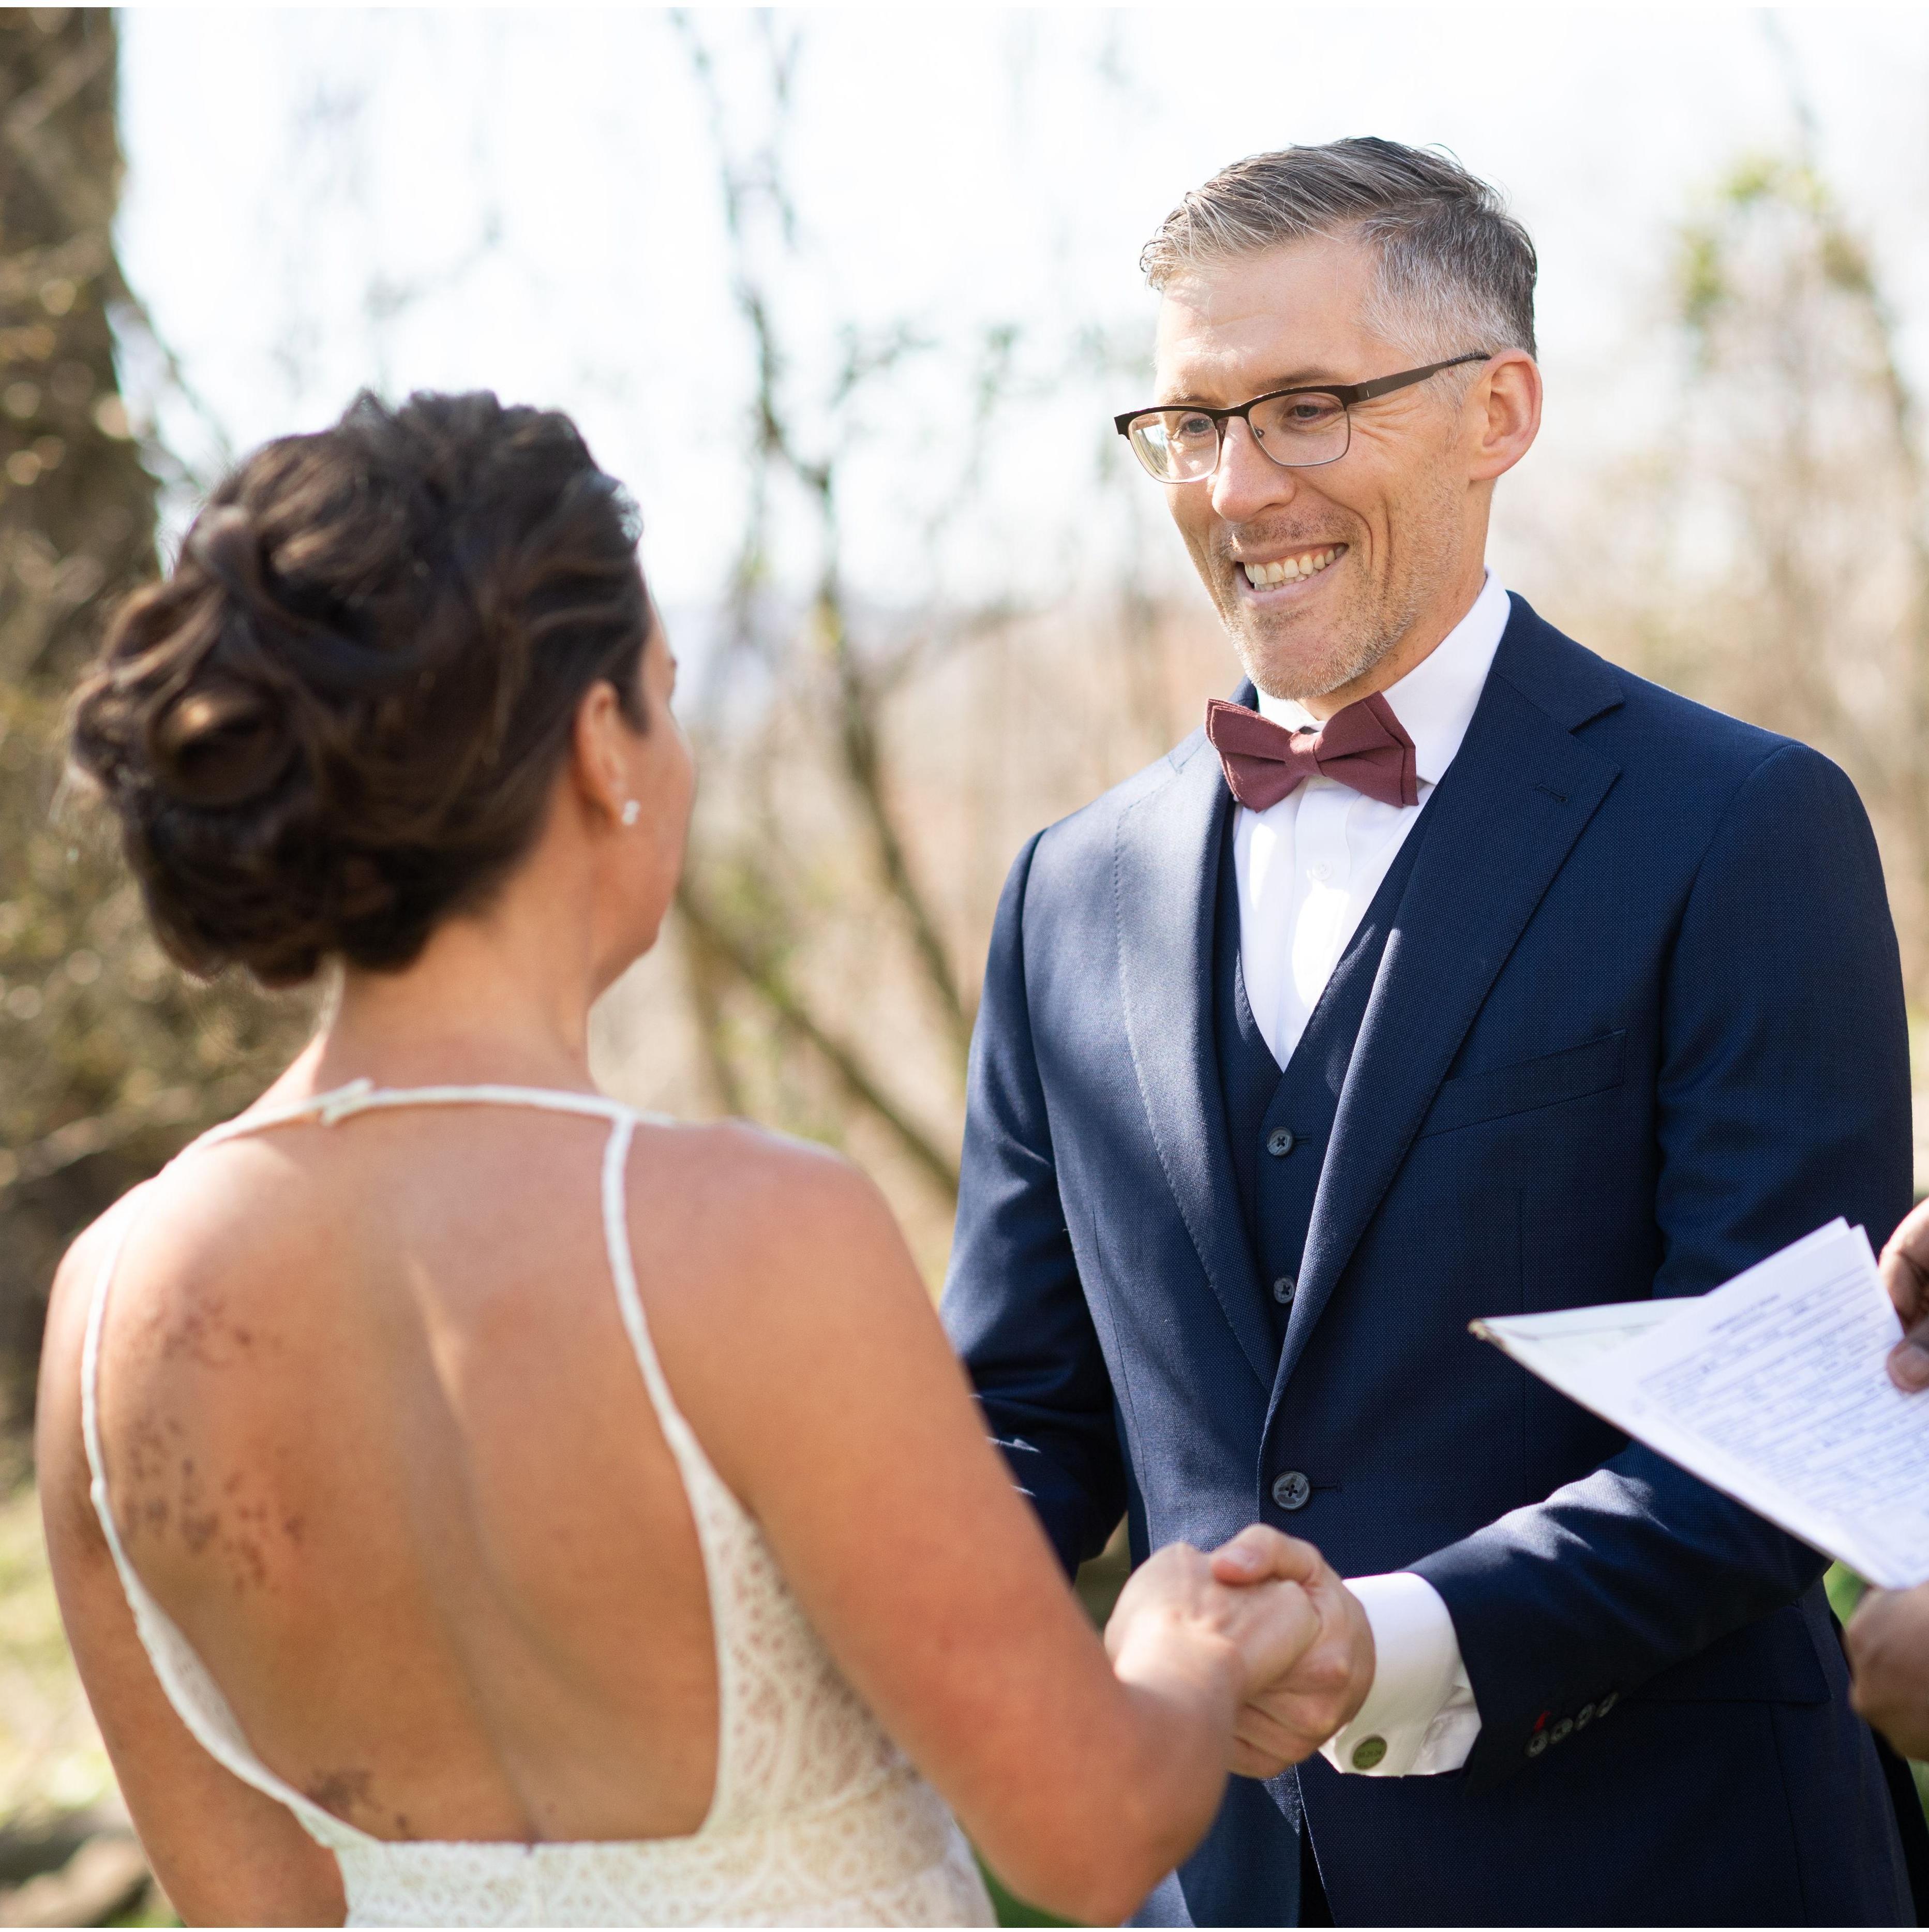 We laughed and almost cried through the short, intimate ceremony